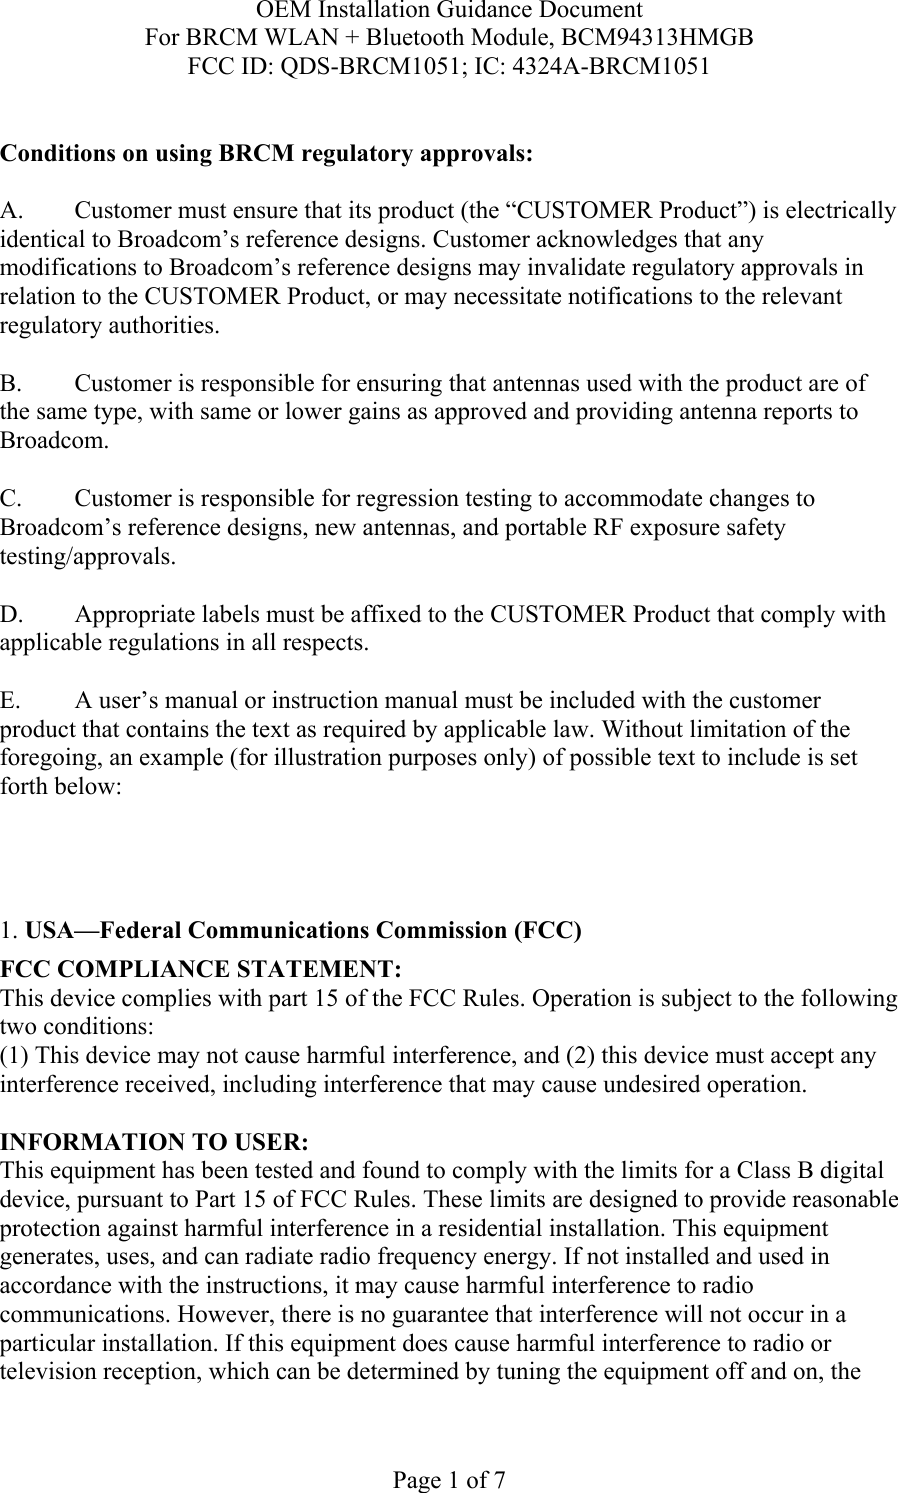 OEM Installation Guidance Document For BRCM WLAN + Bluetooth Module, BCM94313HMGB FCC ID: QDS-BRCM1051; IC: 4324A-BRCM1051  Page 1 of 7  Conditions on using BRCM regulatory approvals:   A.  Customer must ensure that its product (the “CUSTOMER Product”) is electrically identical to Broadcom’s reference designs. Customer acknowledges that any modifications to Broadcom’s reference designs may invalidate regulatory approvals in relation to the CUSTOMER Product, or may necessitate notifications to the relevant regulatory authorities.  B.   Customer is responsible for ensuring that antennas used with the product are of the same type, with same or lower gains as approved and providing antenna reports to Broadcom.  C.   Customer is responsible for regression testing to accommodate changes to Broadcom’s reference designs, new antennas, and portable RF exposure safety testing/approvals.  D.  Appropriate labels must be affixed to the CUSTOMER Product that comply with applicable regulations in all respects.    E.  A user’s manual or instruction manual must be included with the customer product that contains the text as required by applicable law. Without limitation of the foregoing, an example (for illustration purposes only) of possible text to include is set forth below:      1. USA—Federal Communications Commission (FCC) FCC COMPLIANCE STATEMENT: This device complies with part 15 of the FCC Rules. Operation is subject to the following two conditions: (1) This device may not cause harmful interference, and (2) this device must accept any interference received, including interference that may cause undesired operation.  INFORMATION TO USER: This equipment has been tested and found to comply with the limits for a Class B digital device, pursuant to Part 15 of FCC Rules. These limits are designed to provide reasonable protection against harmful interference in a residential installation. This equipment generates, uses, and can radiate radio frequency energy. If not installed and used in accordance with the instructions, it may cause harmful interference to radio communications. However, there is no guarantee that interference will not occur in a particular installation. If this equipment does cause harmful interference to radio or television reception, which can be determined by tuning the equipment off and on, the 